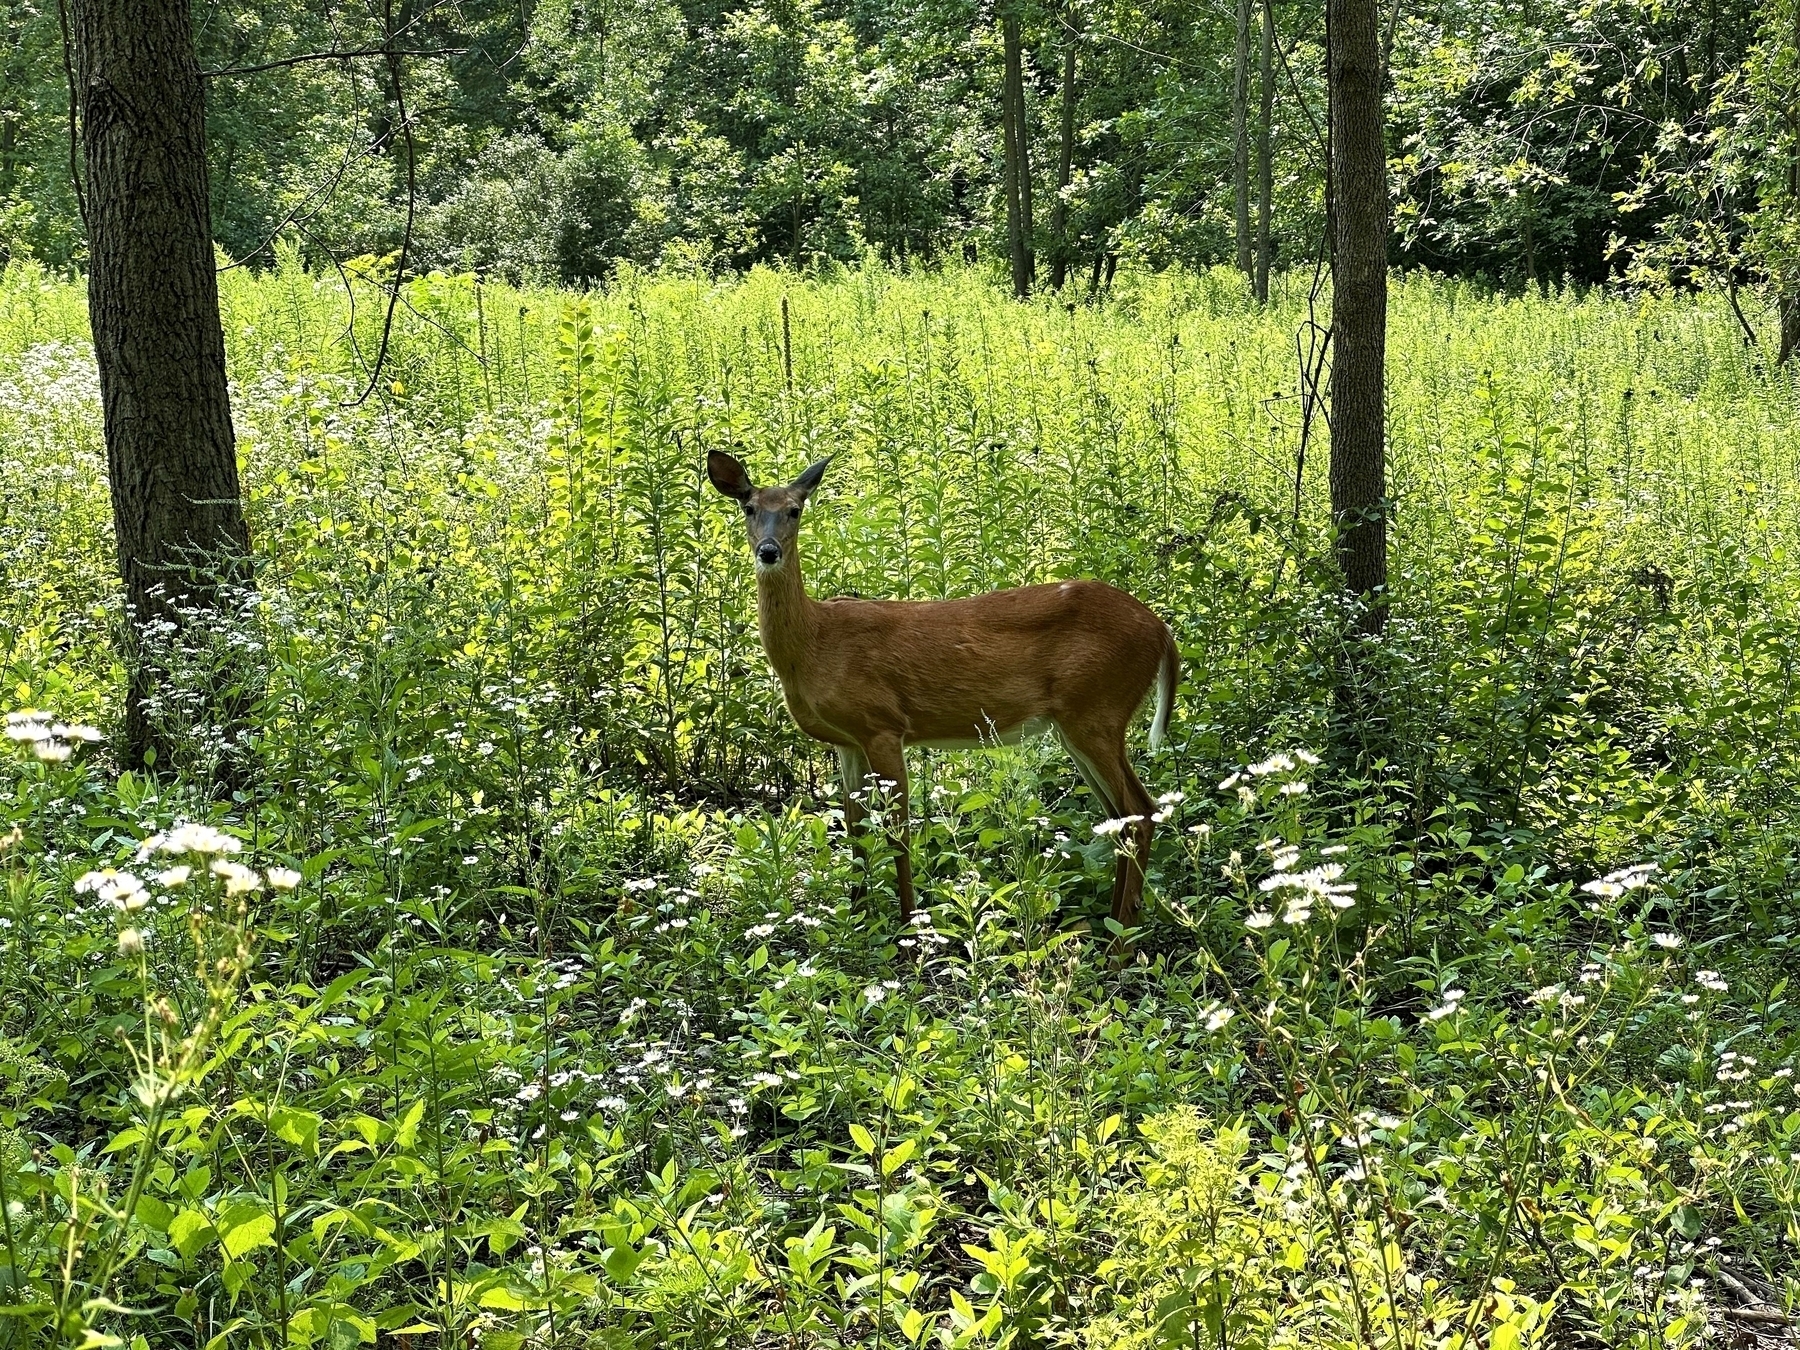 A deer stands alert amidst a lush, green forest, surrounded by tall plants and trees, illuminated by dappled sunlight.